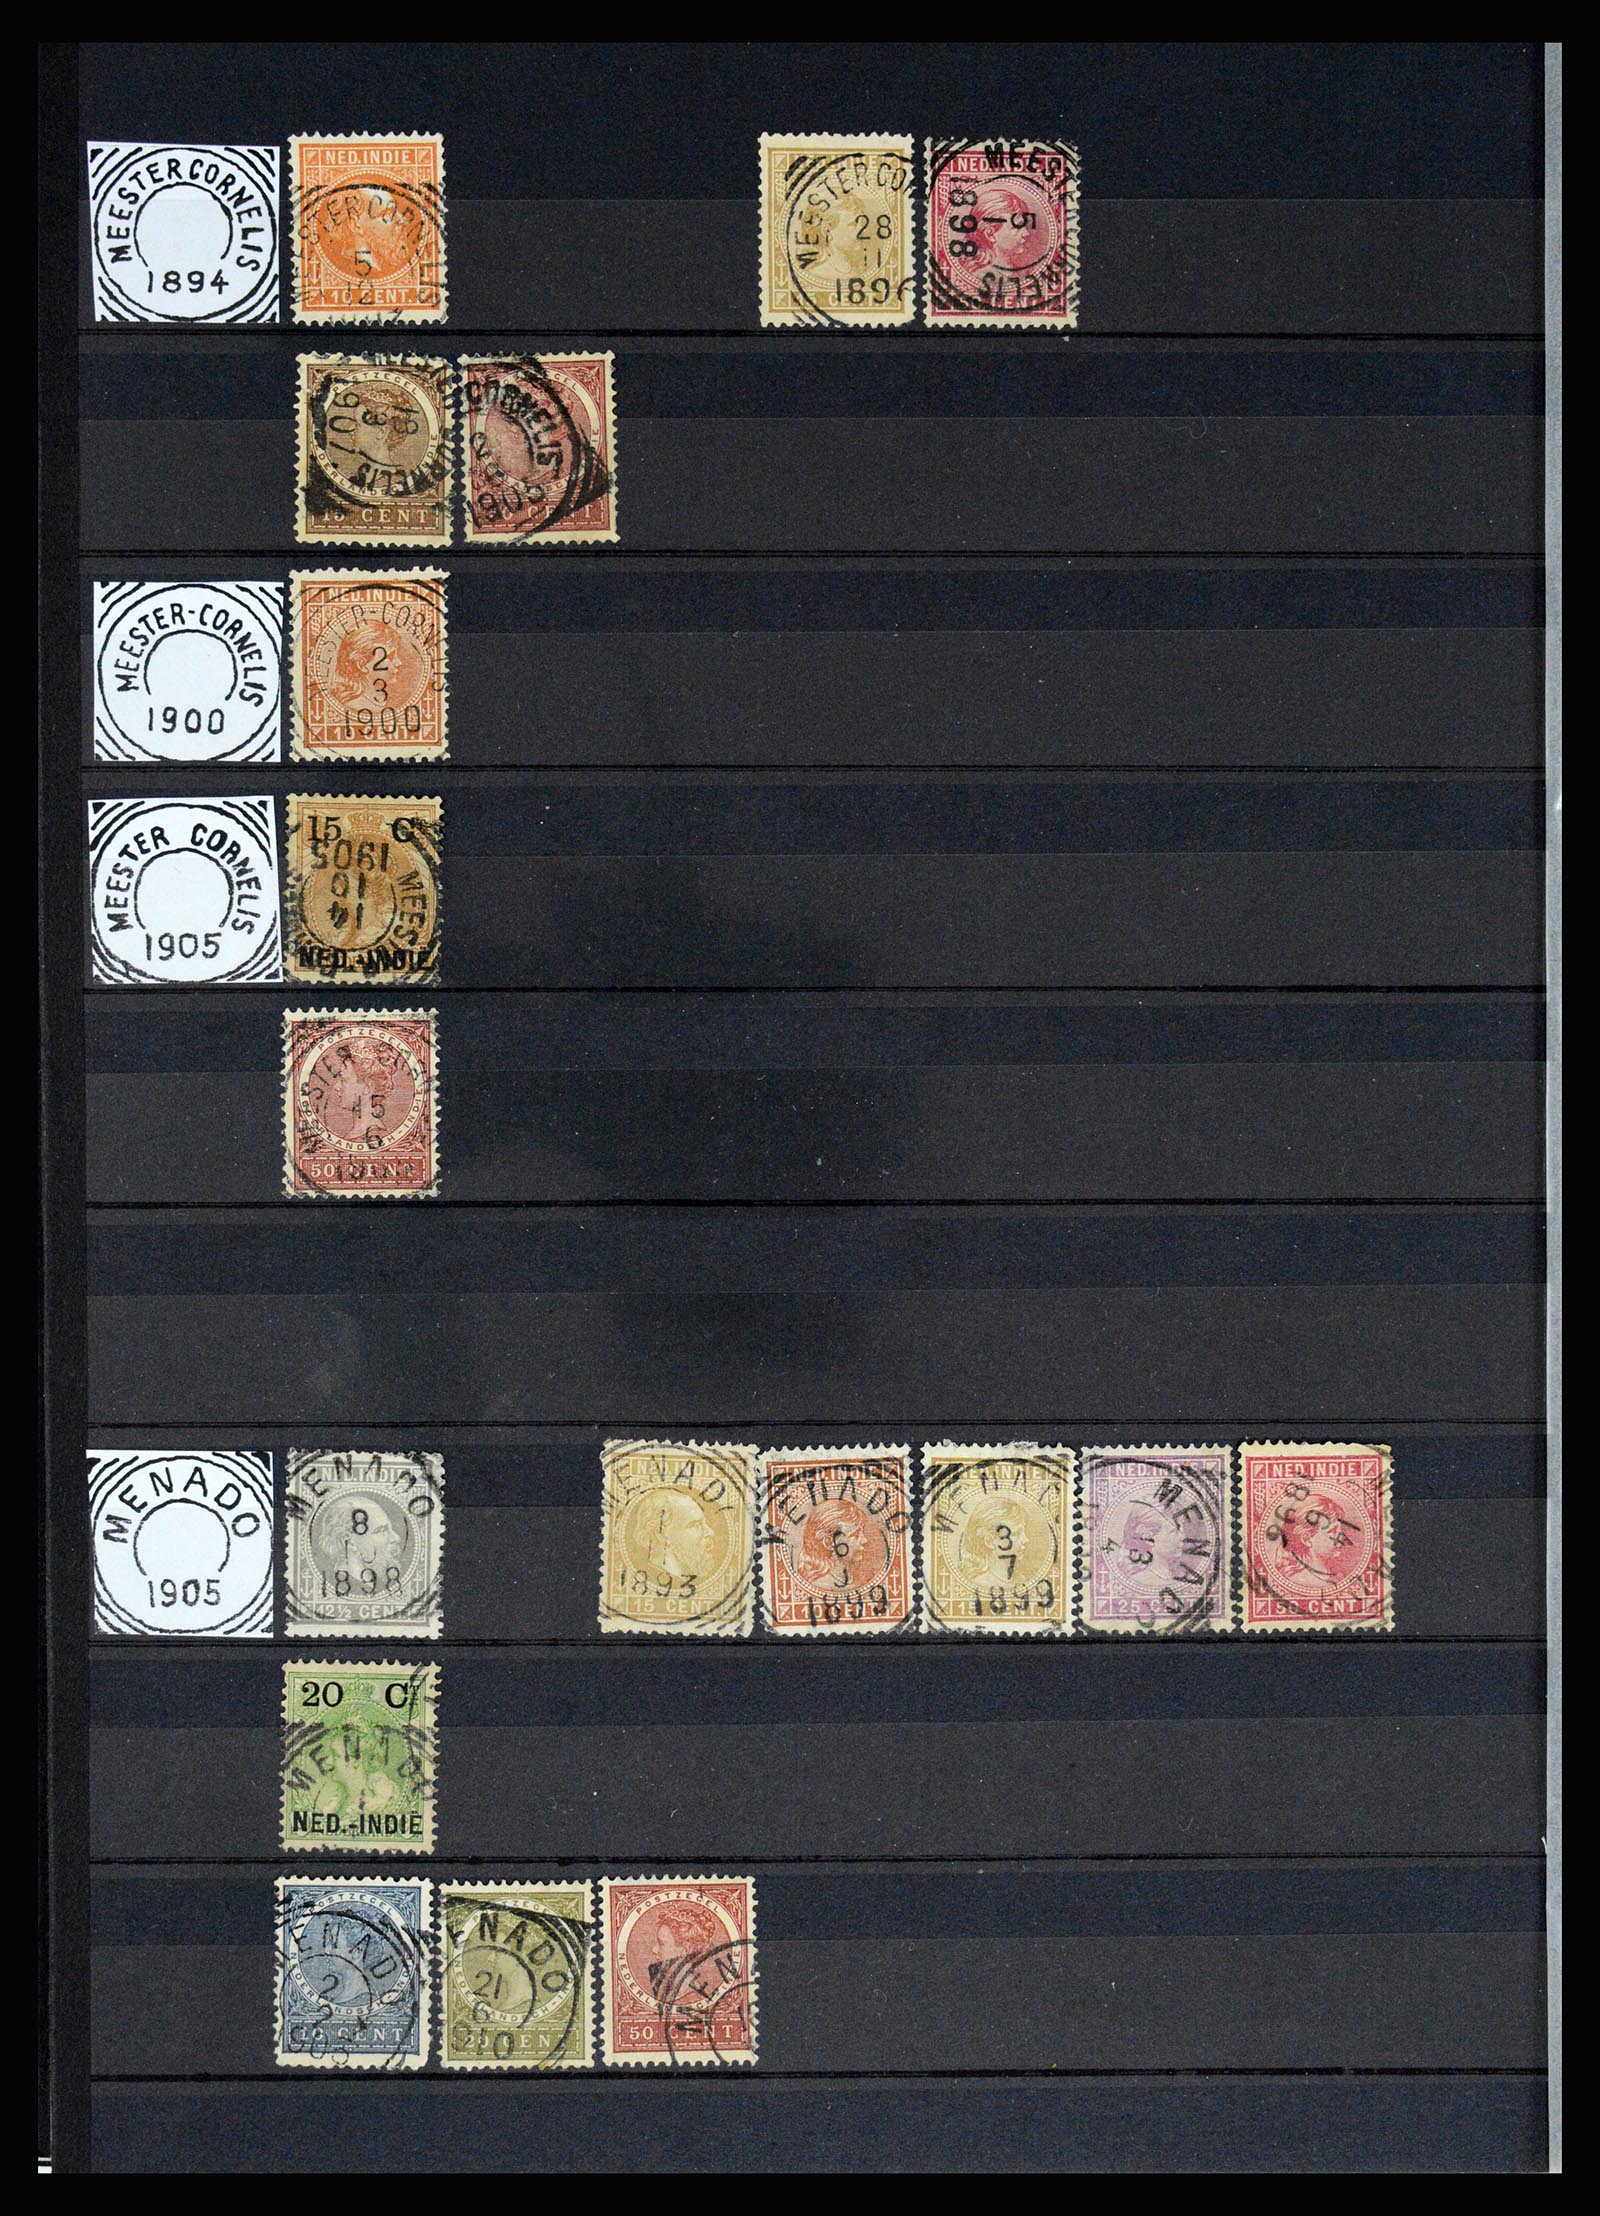 36839 029 - Stamp collection 36839 Dutch east Indies square cancels.